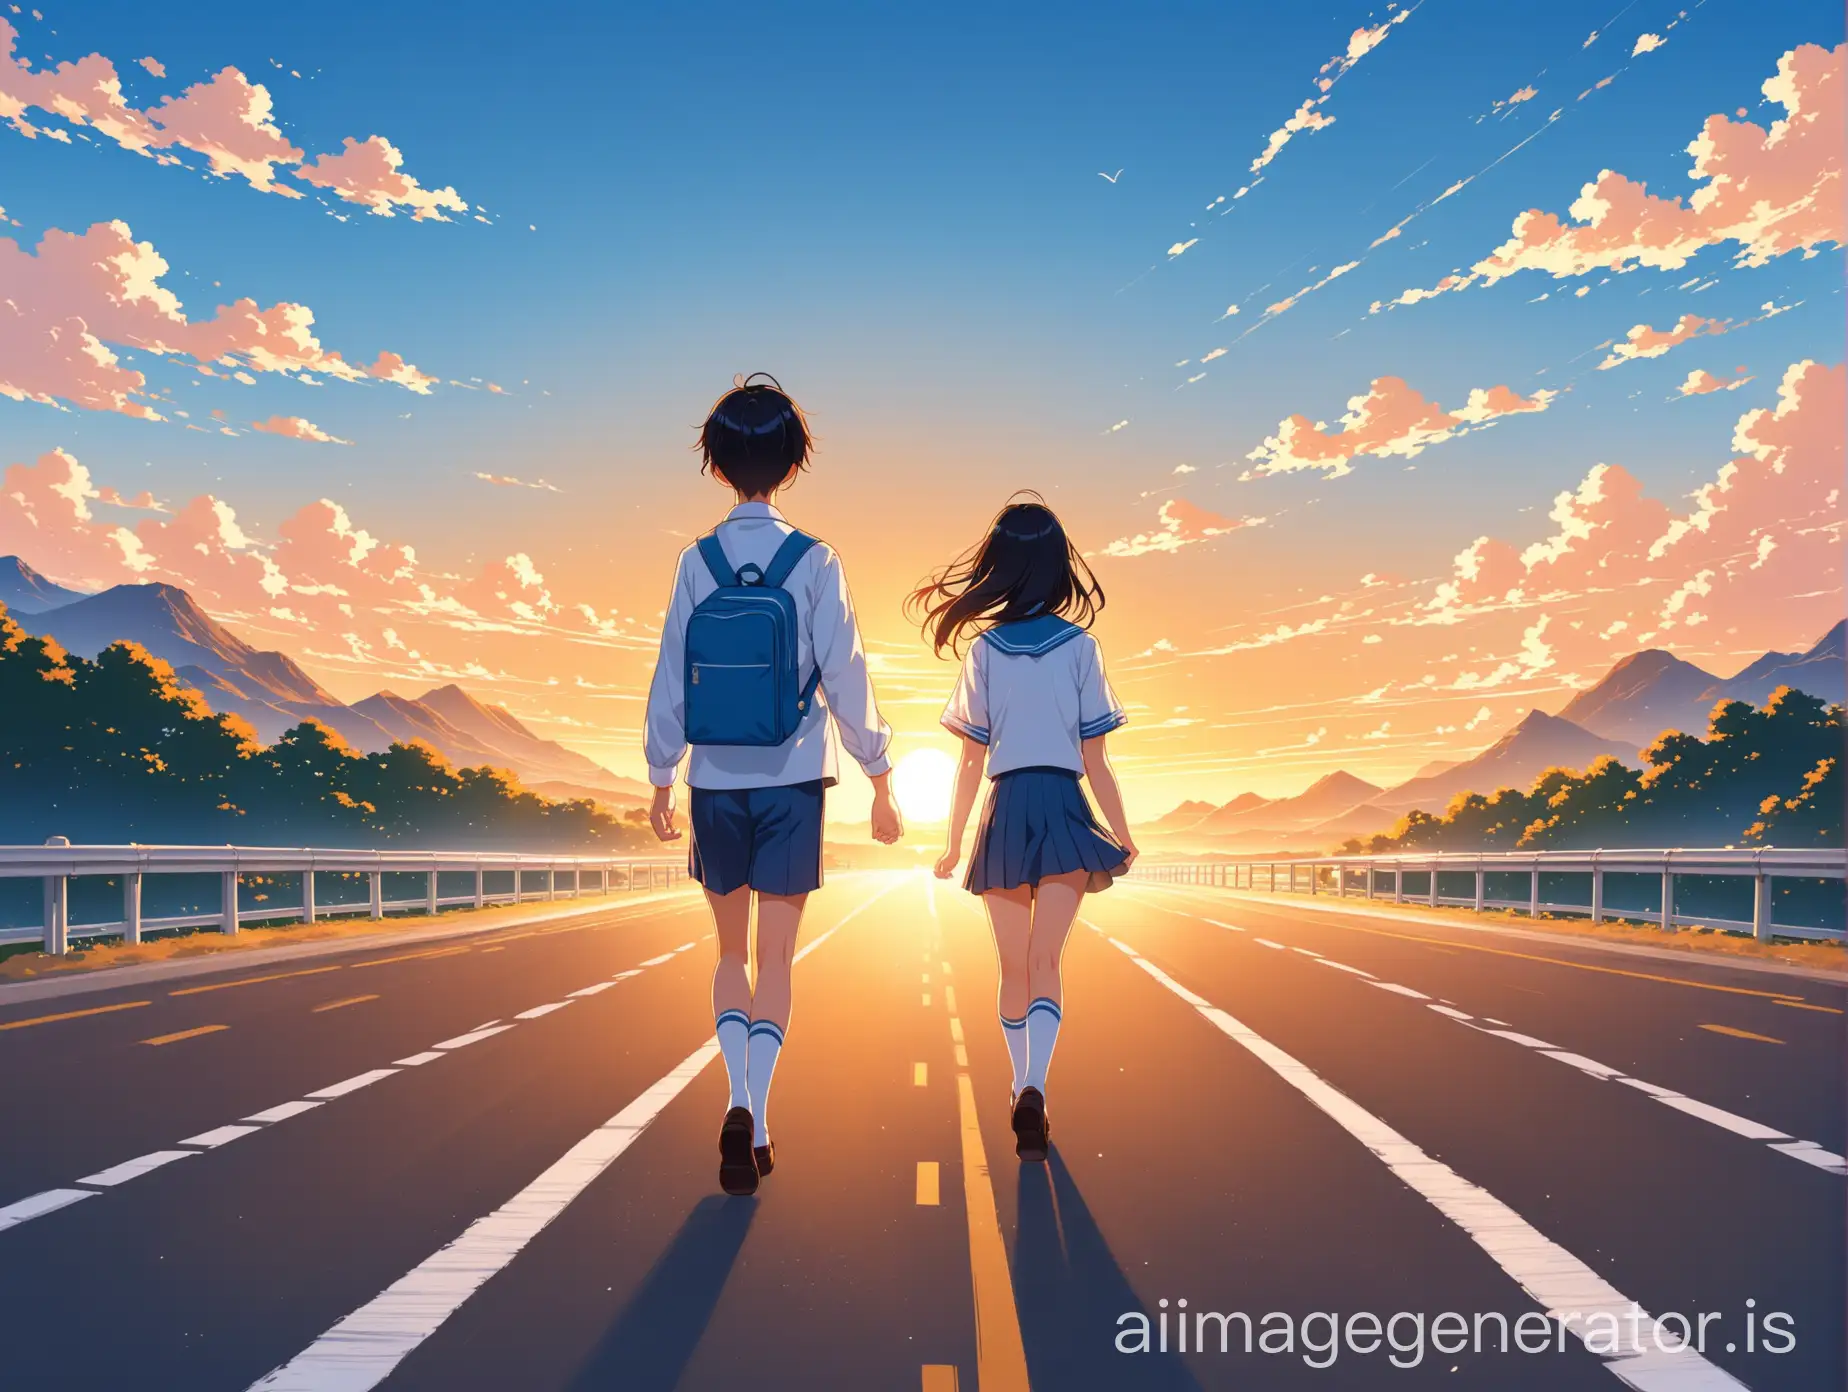 Animated Chinese student walking towards the sunrise on the road, wearing a blue-white school uniform, handsome